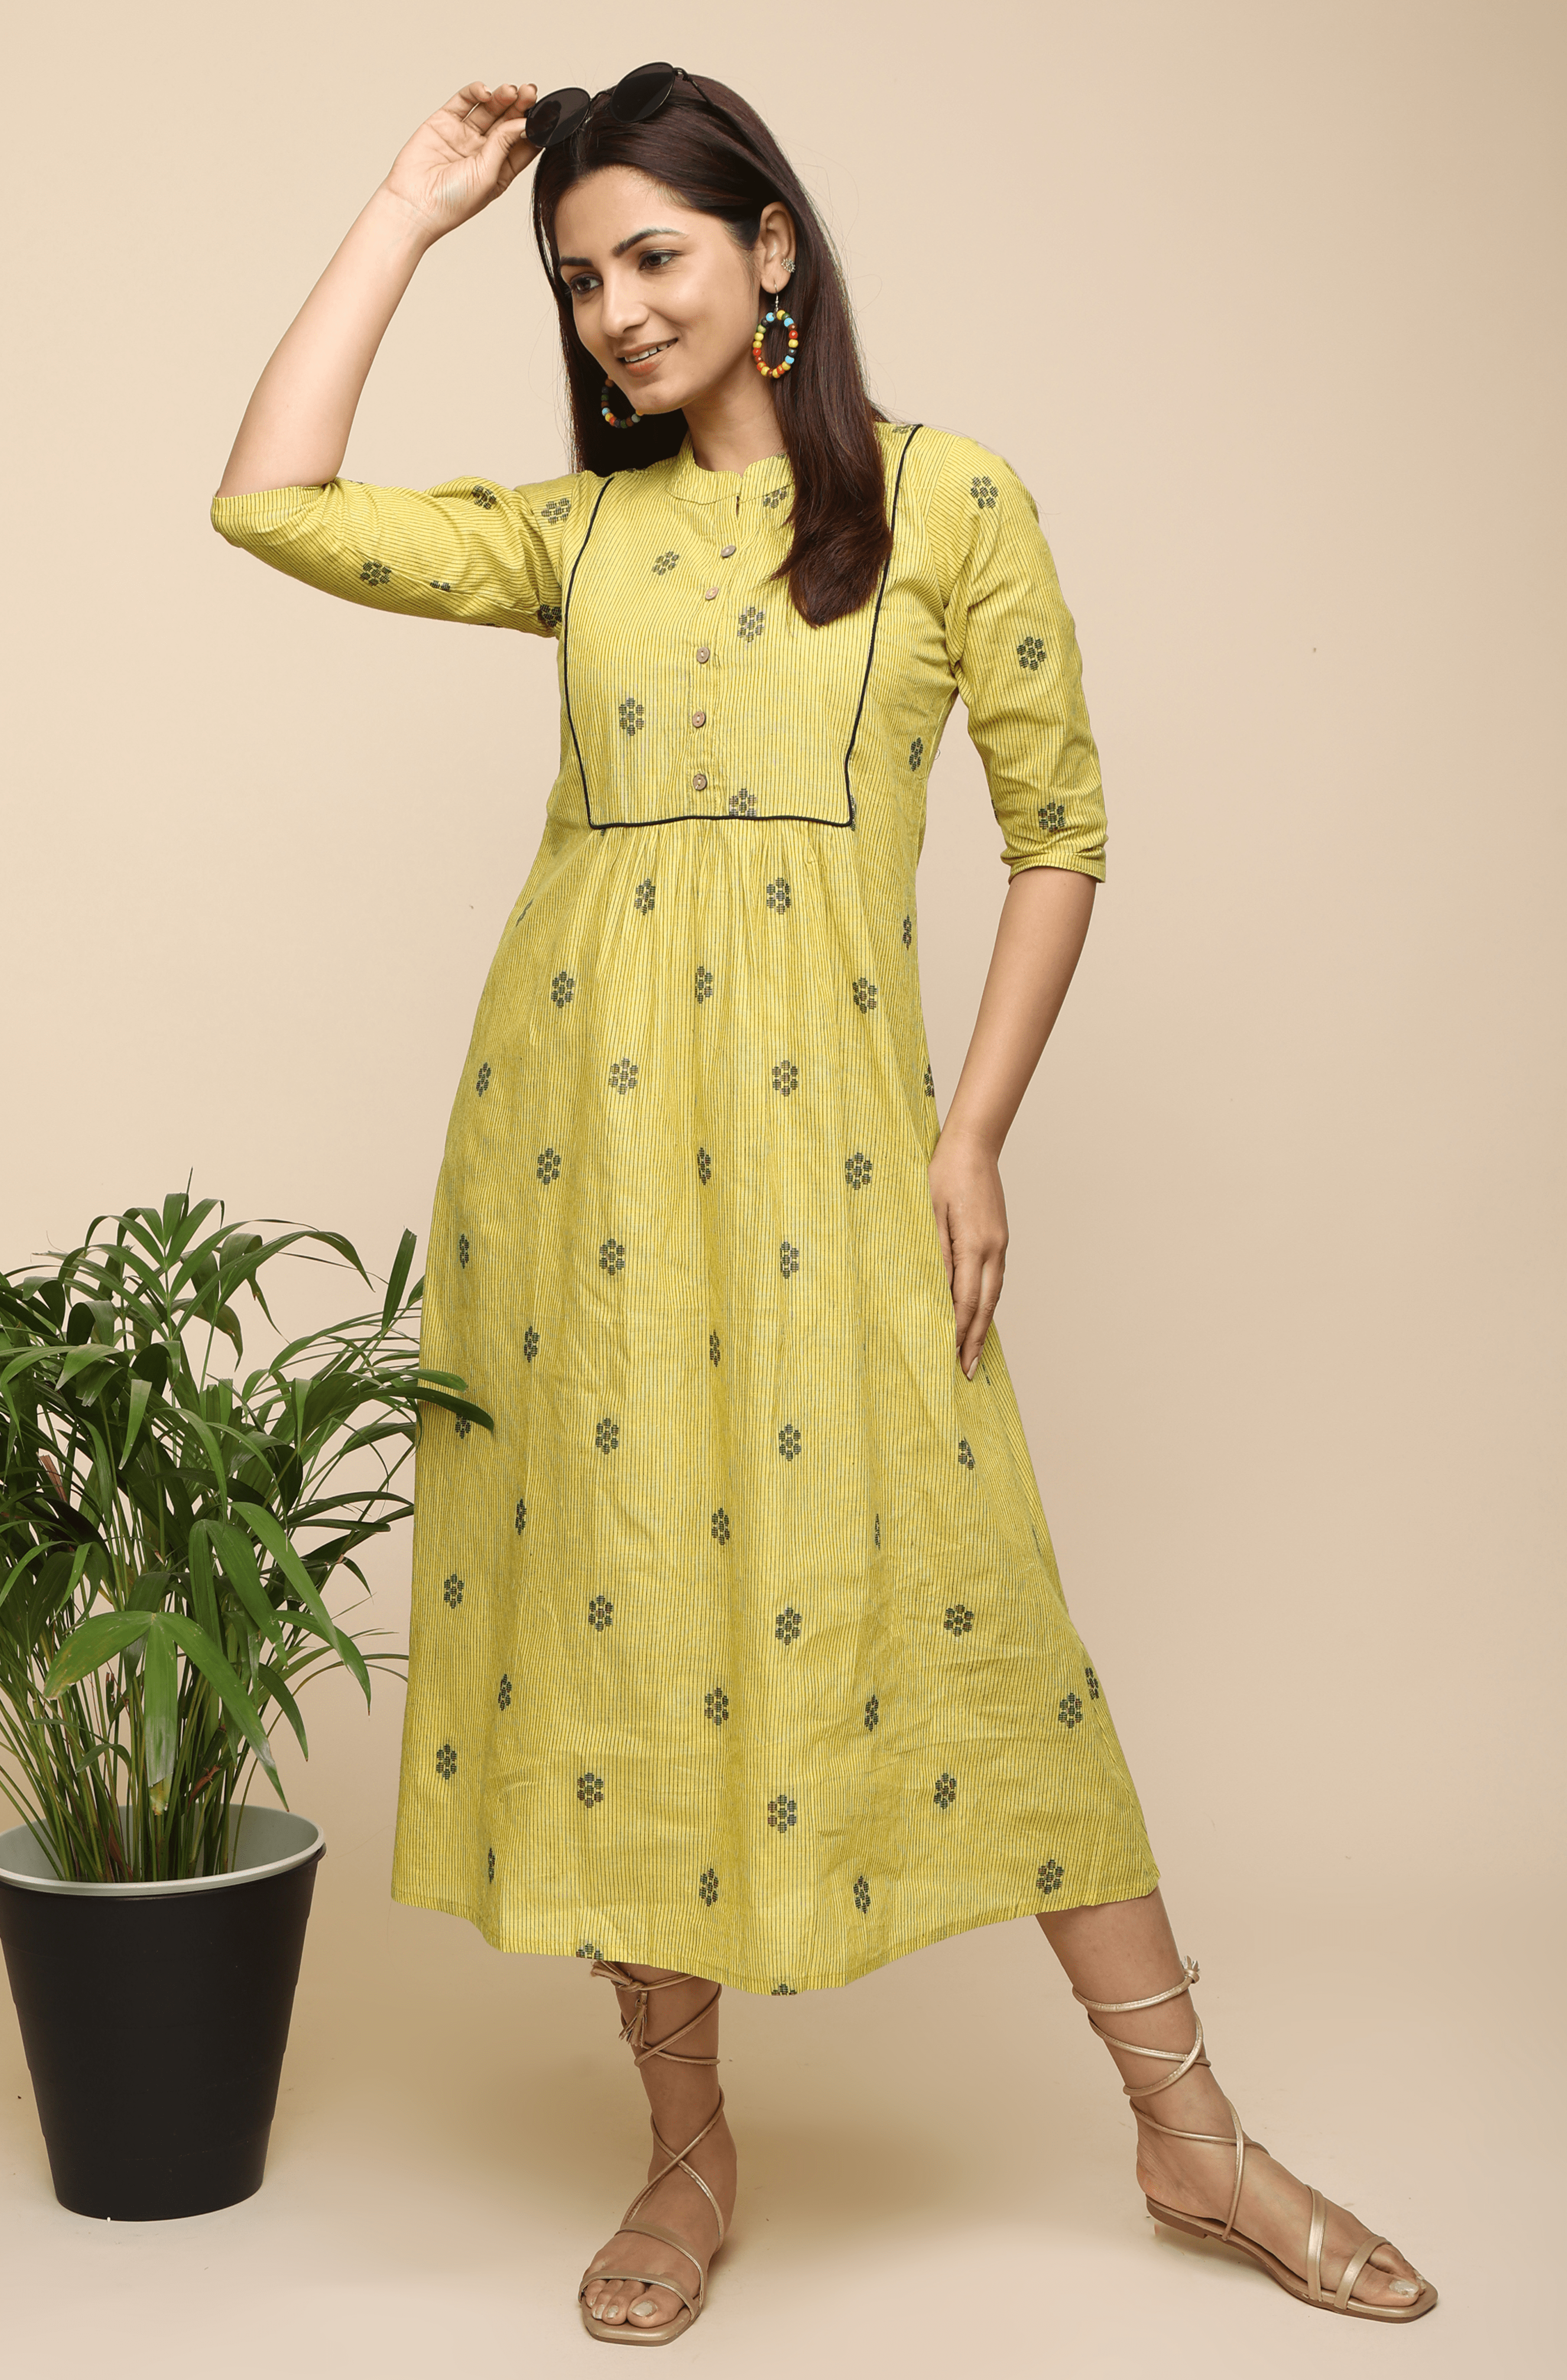 Floral and striped cotton dress